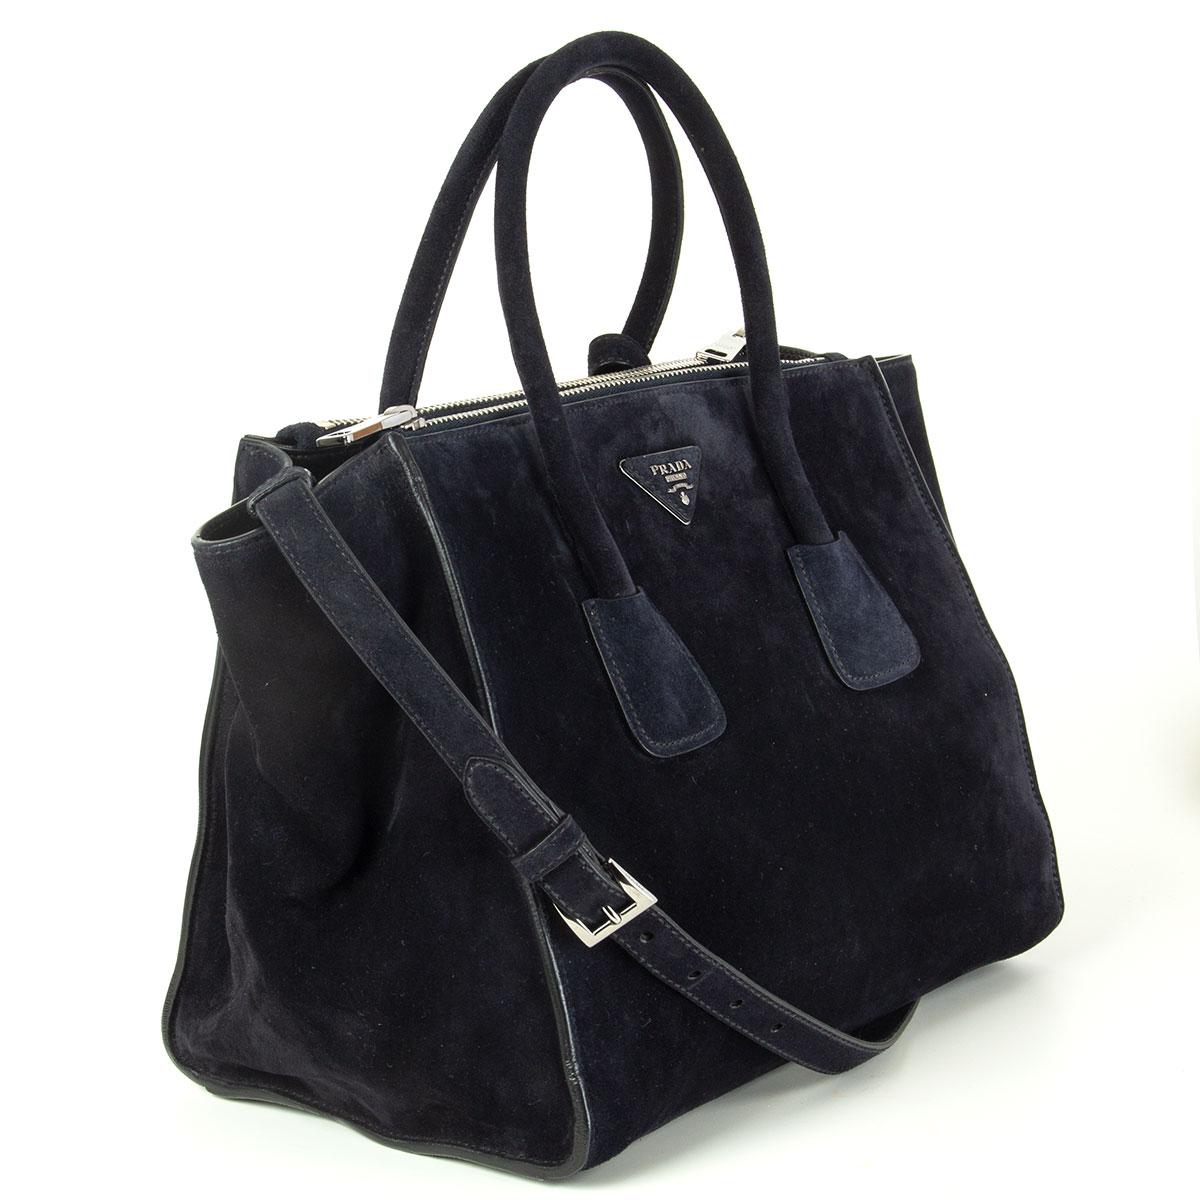 Prada 'Twin Pocket' tote in midnight blue Scamsciato suede featuring silver-tone hardware. Opens with a push-button and is lined in smooth black lambskin with two extra large zip pockets on the side, a small zip pocket against the back and a open